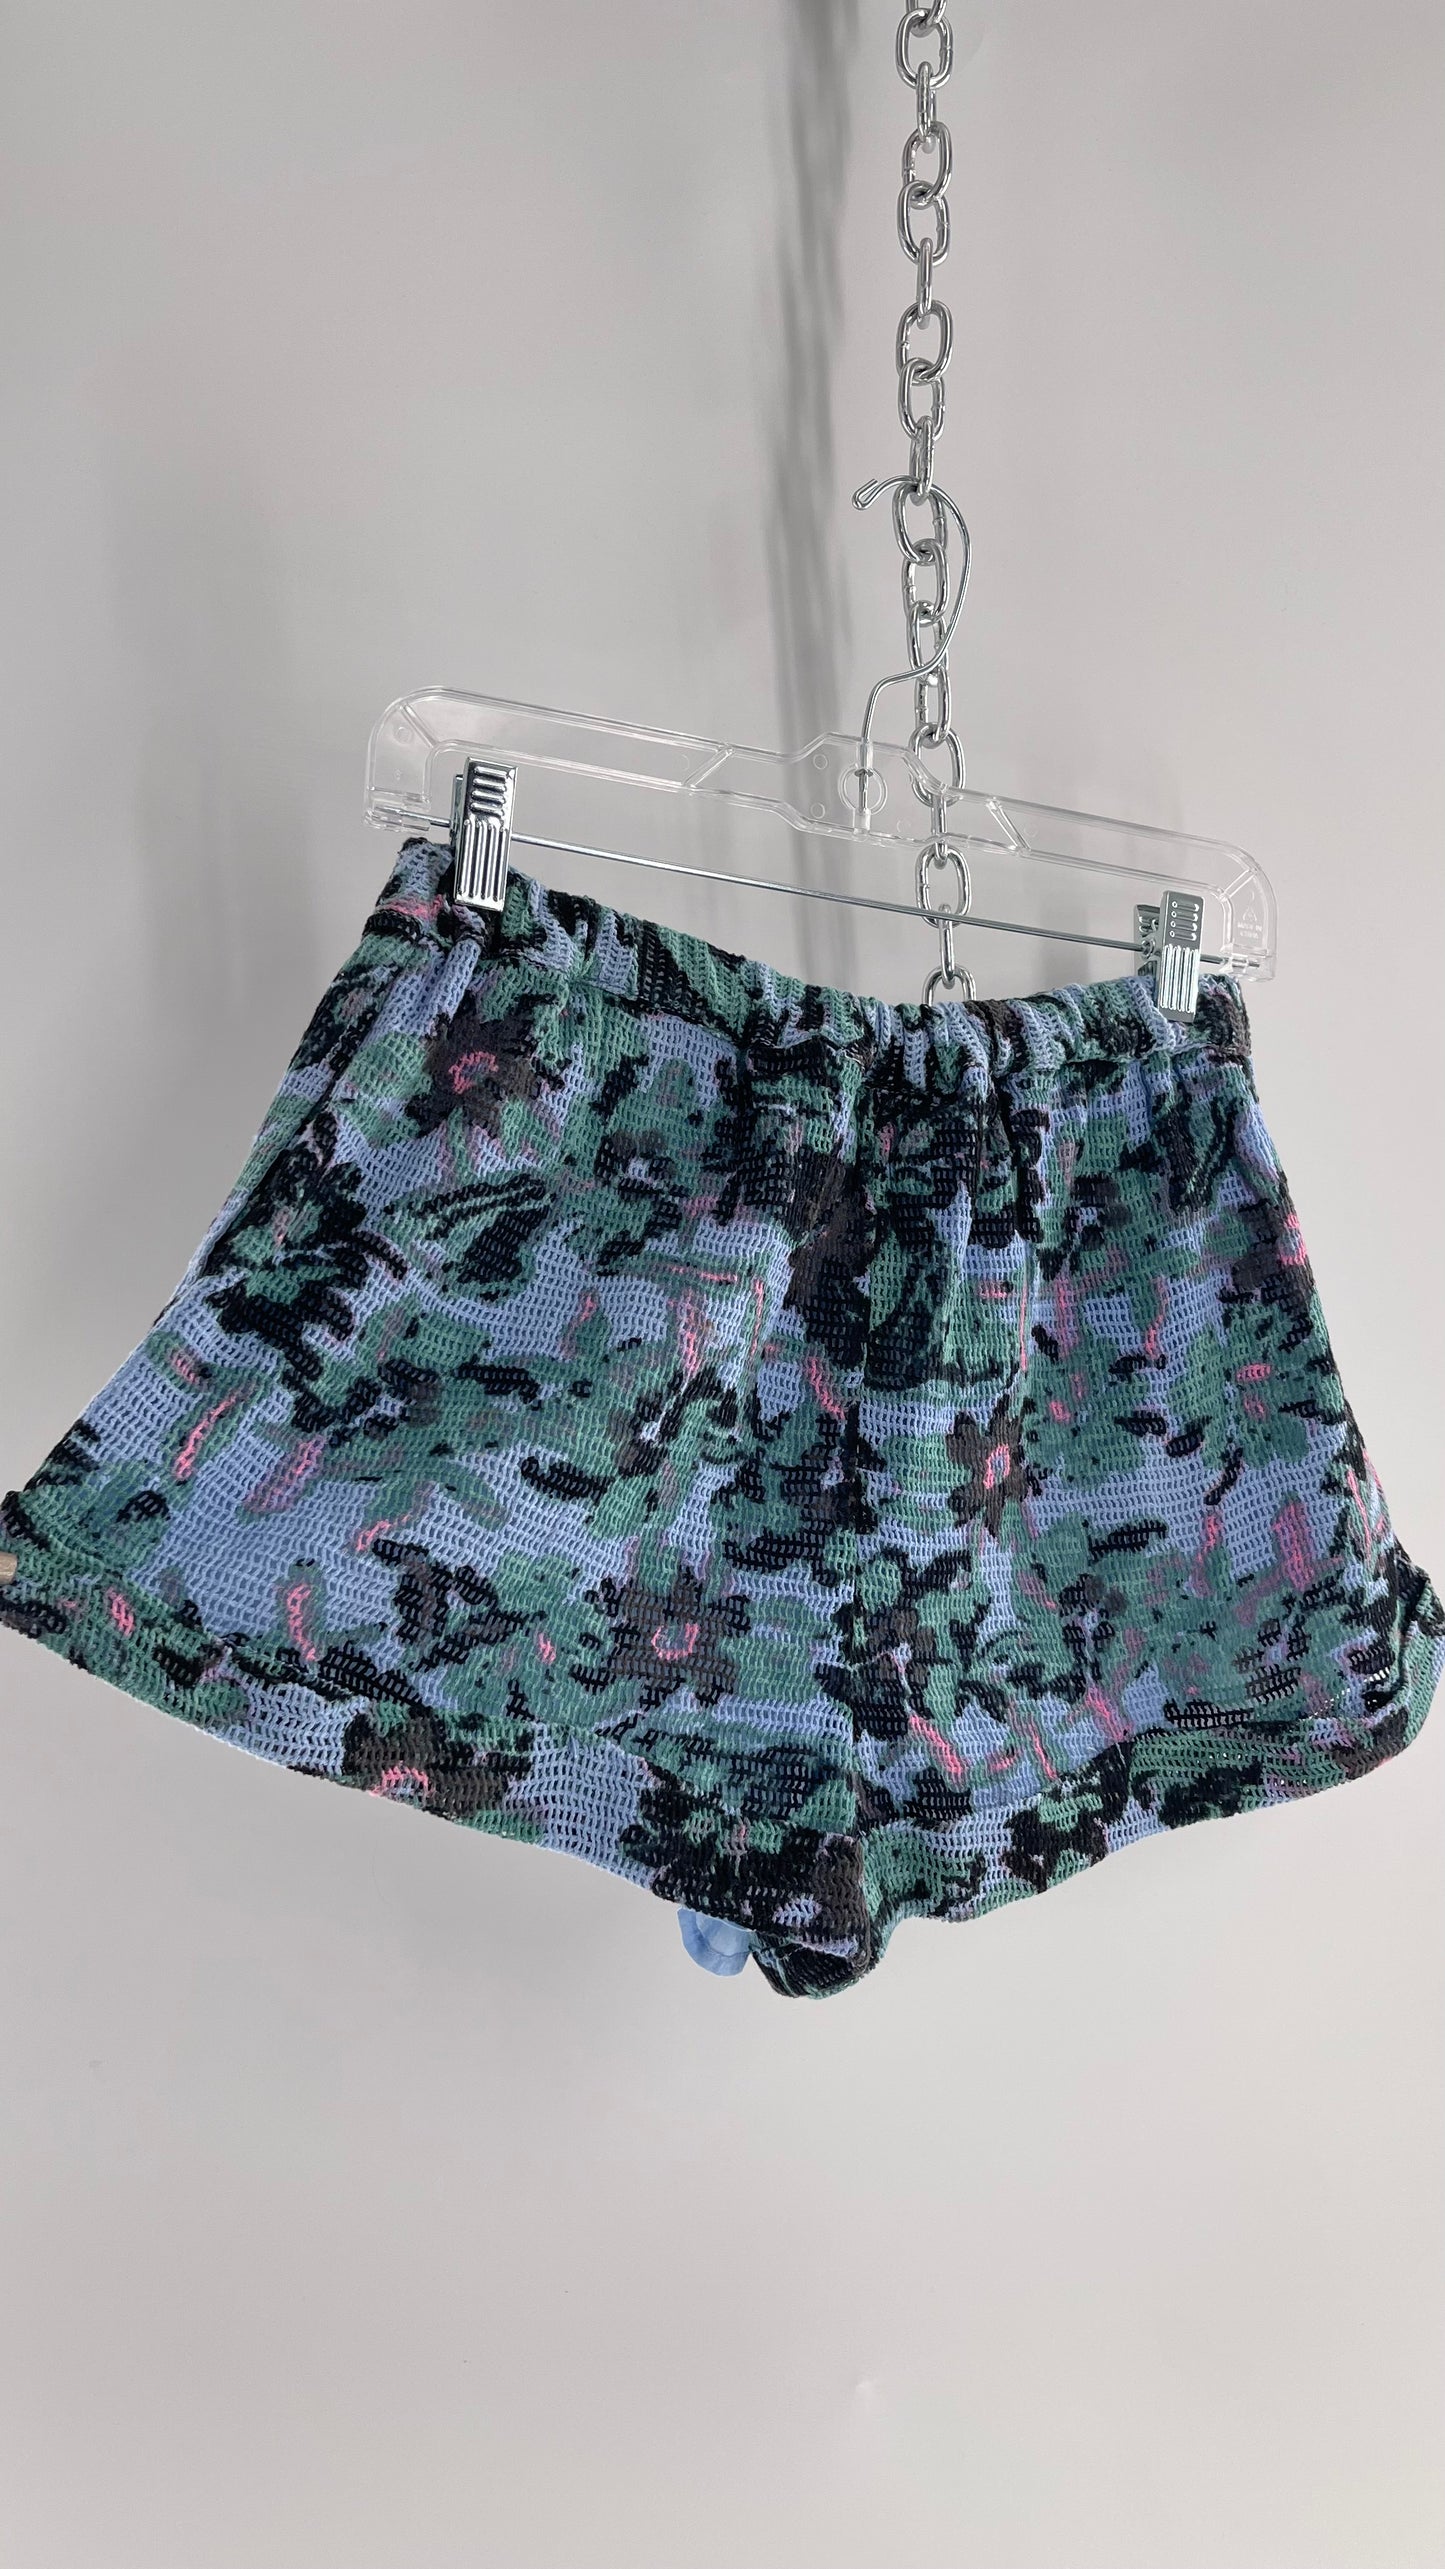 Urban Outfitters Out from Under Powder Blue and Green Floral Mesh/Gauze Shorts (Small)